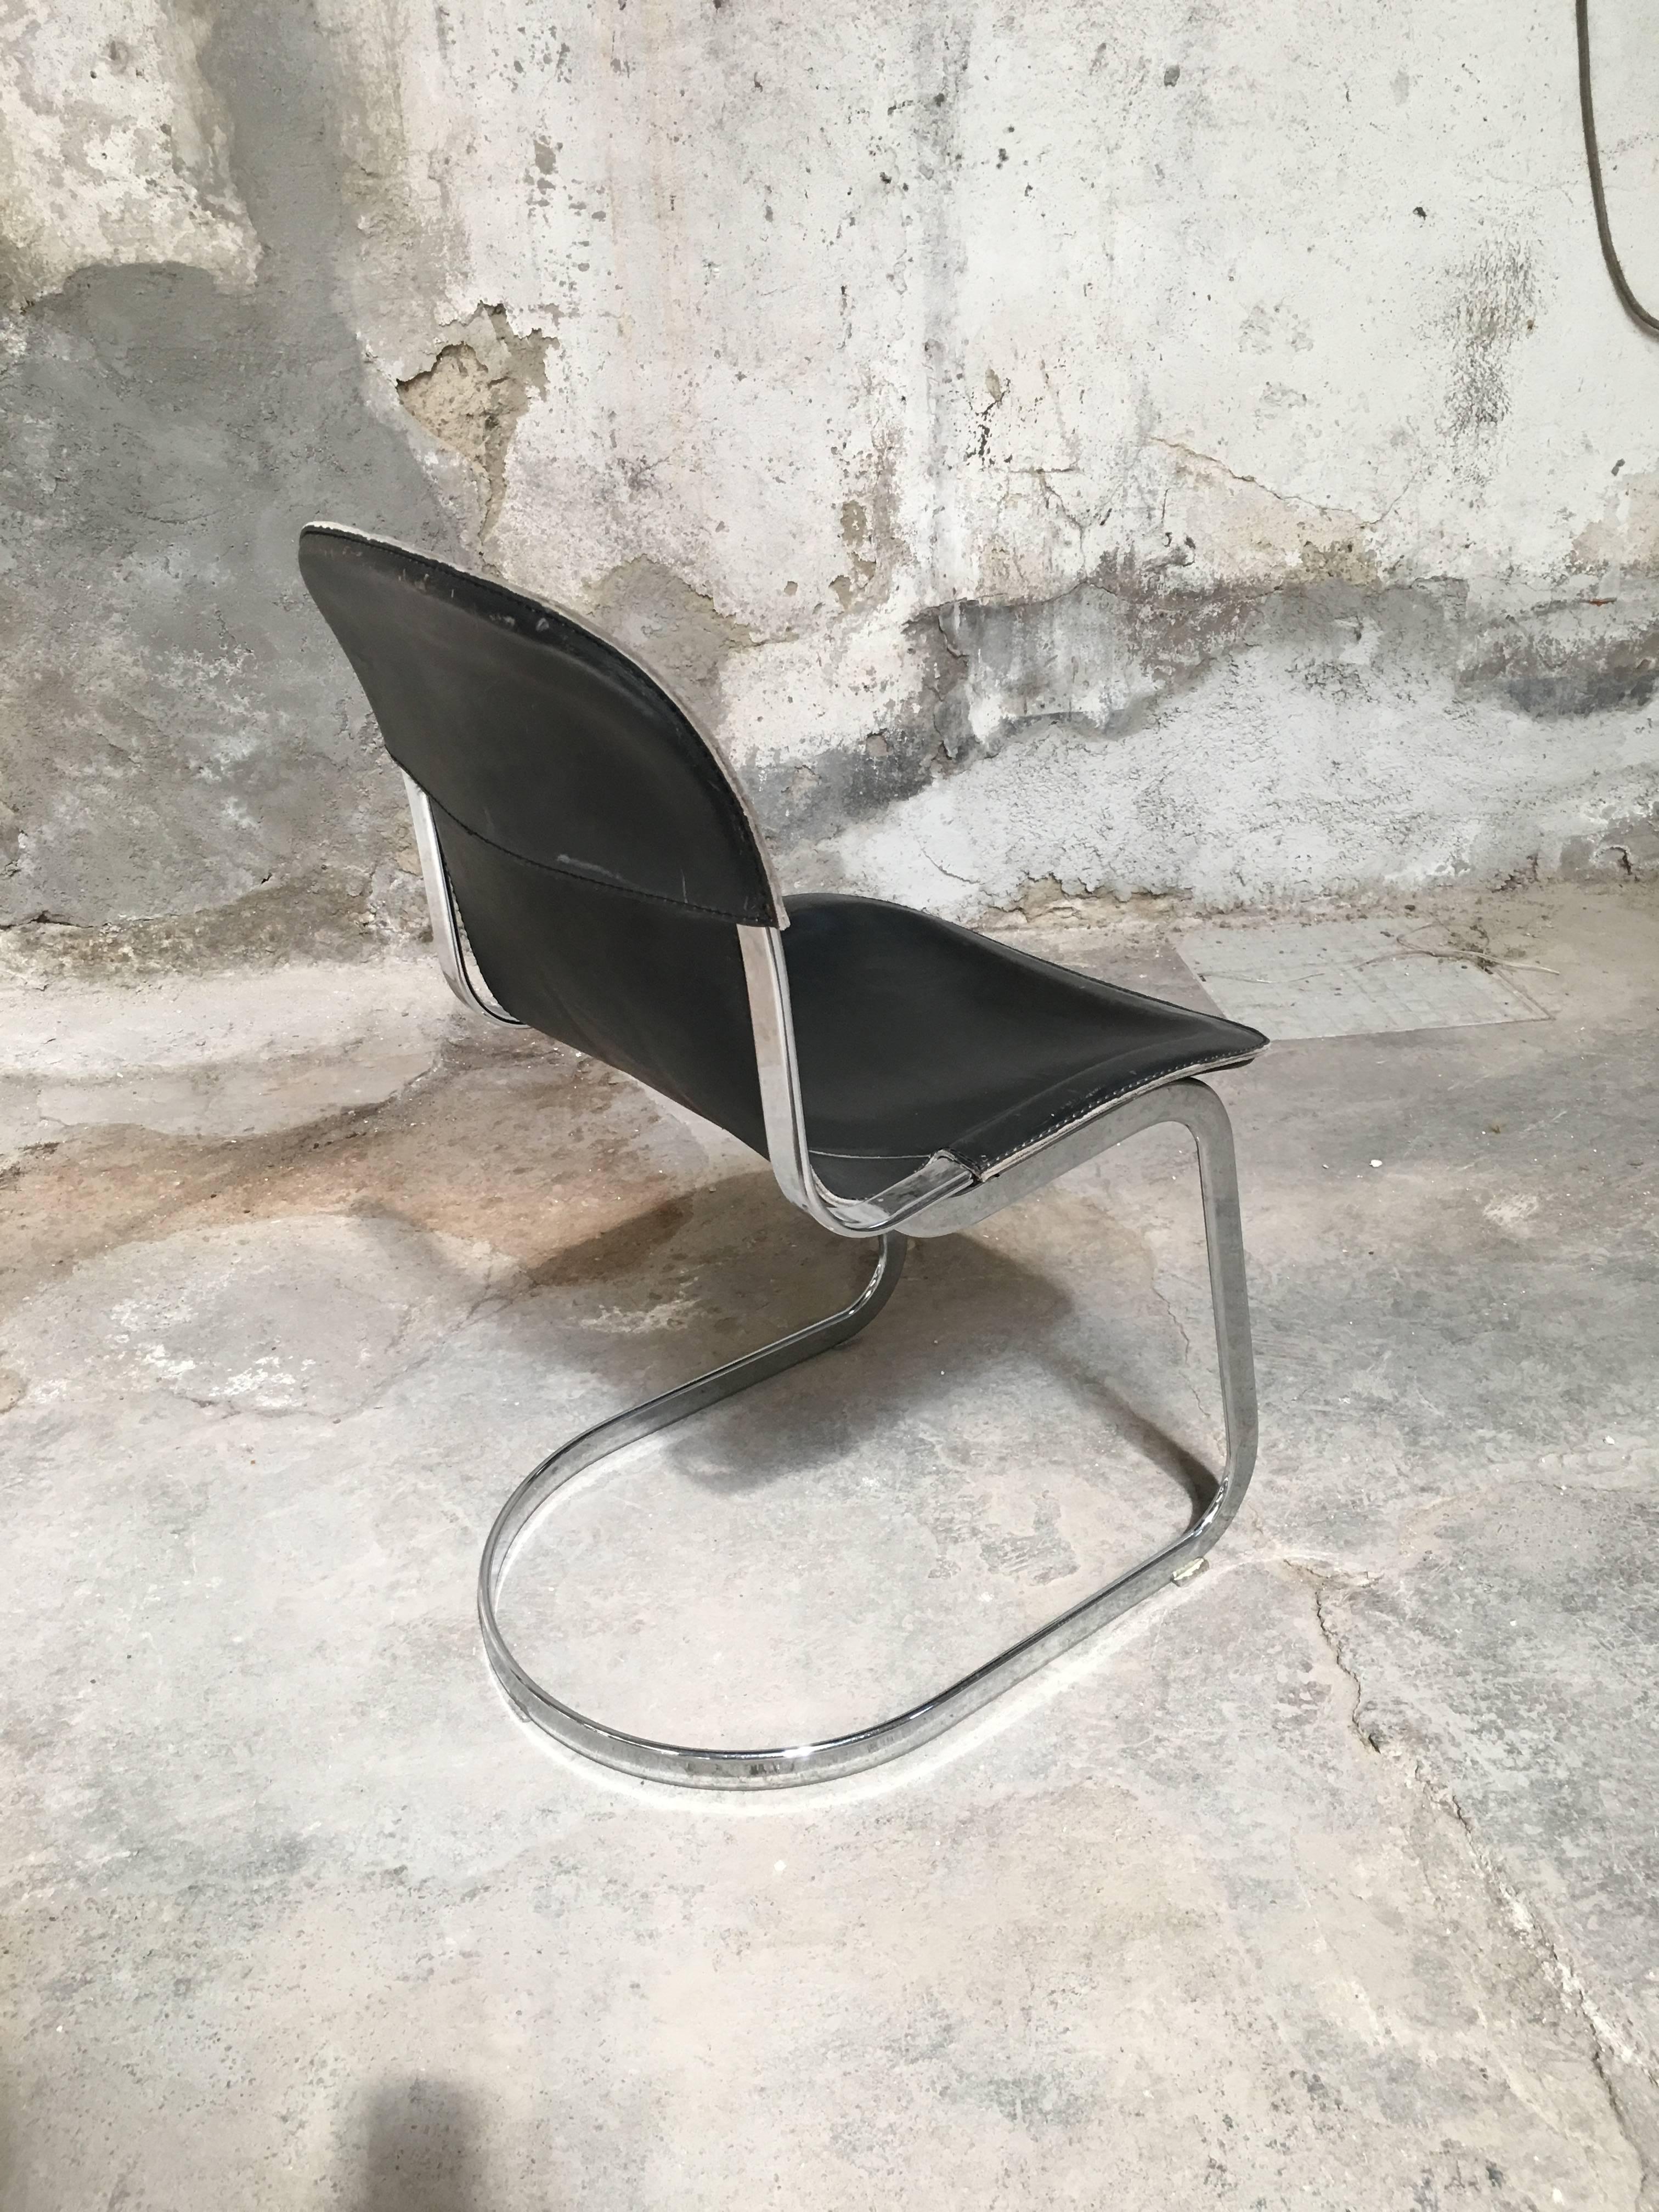 Four Italian Chairs with Original Black Leather Seat by Willy Rizzo for Cidue 1